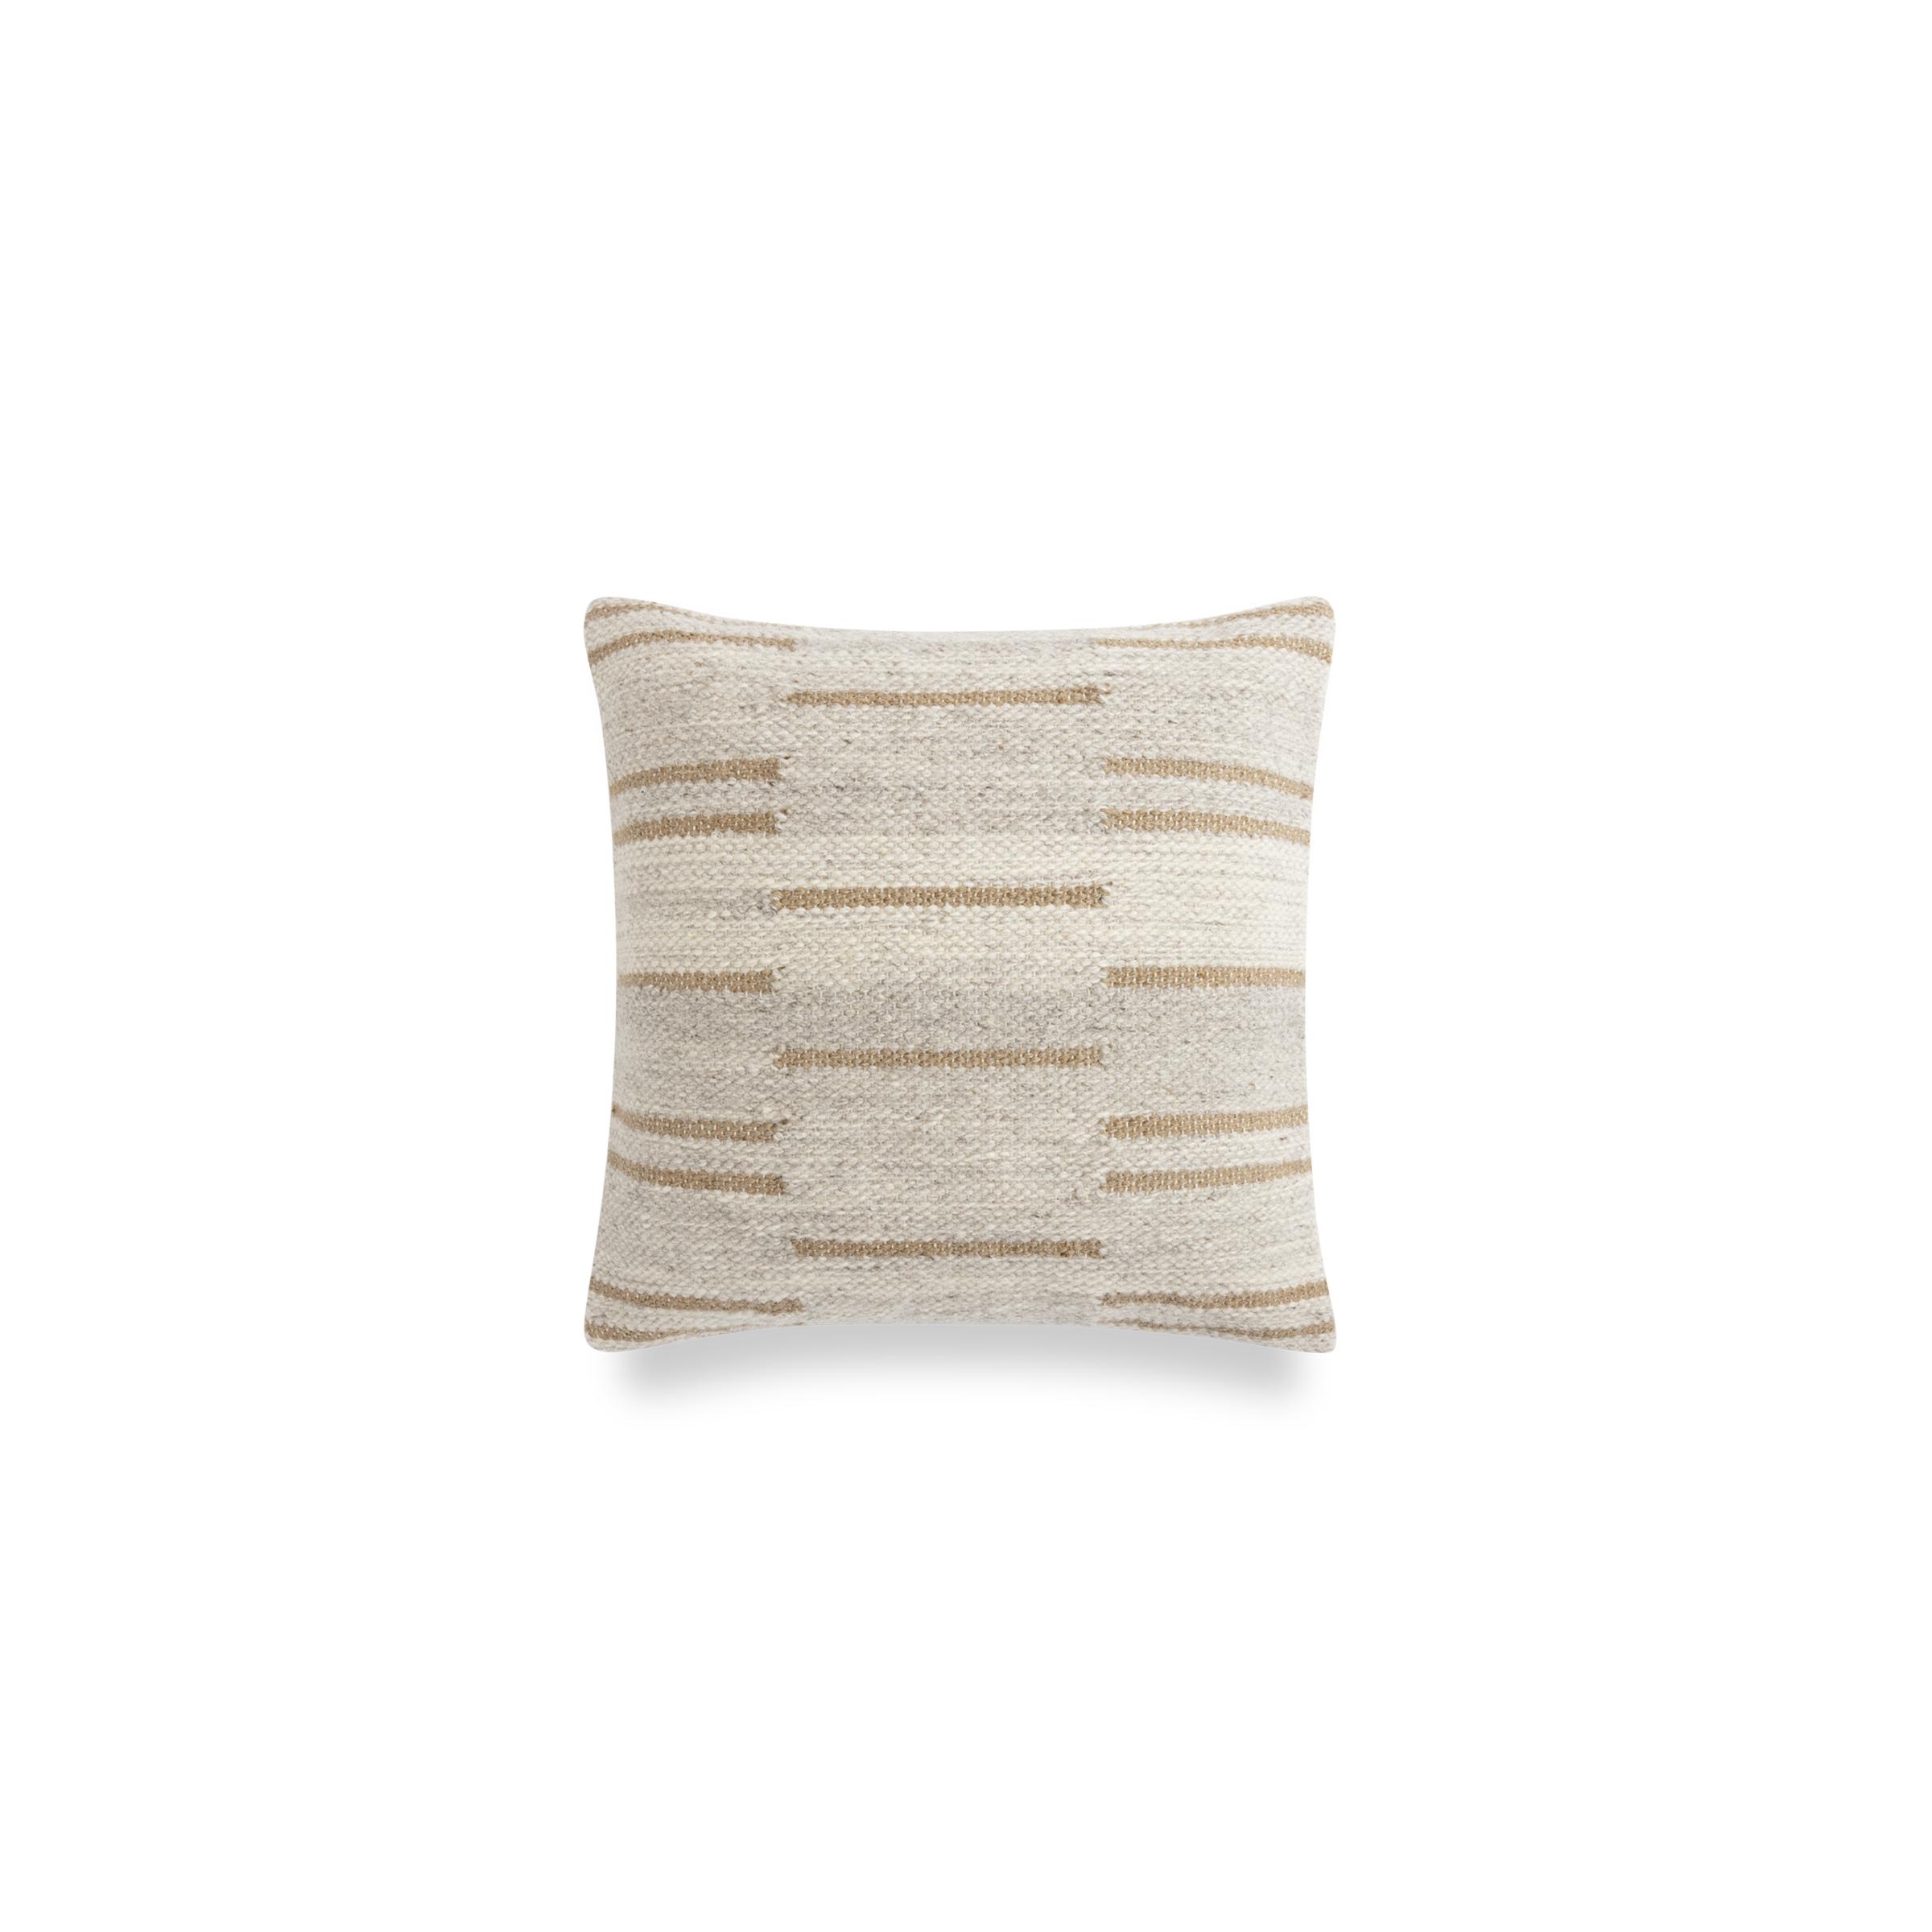 Interval Hand-tufted Pillow Cover in Beige - Image 0